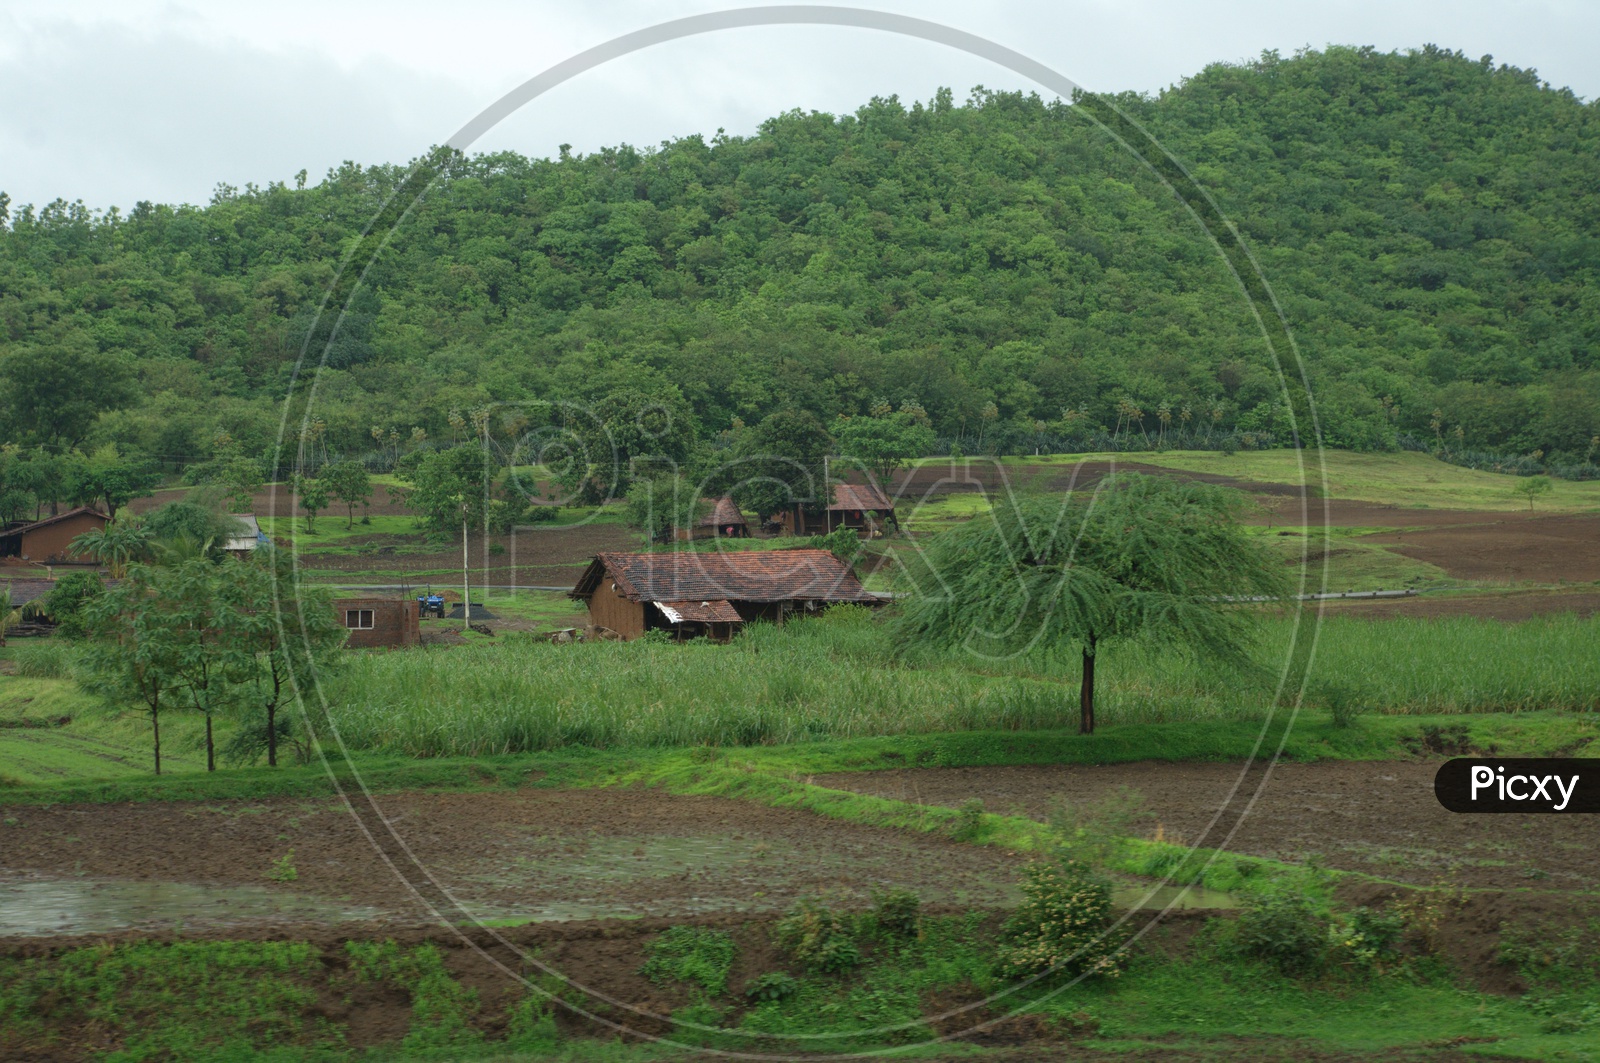 Landscape view of agriculture fields in Kerala with old houses